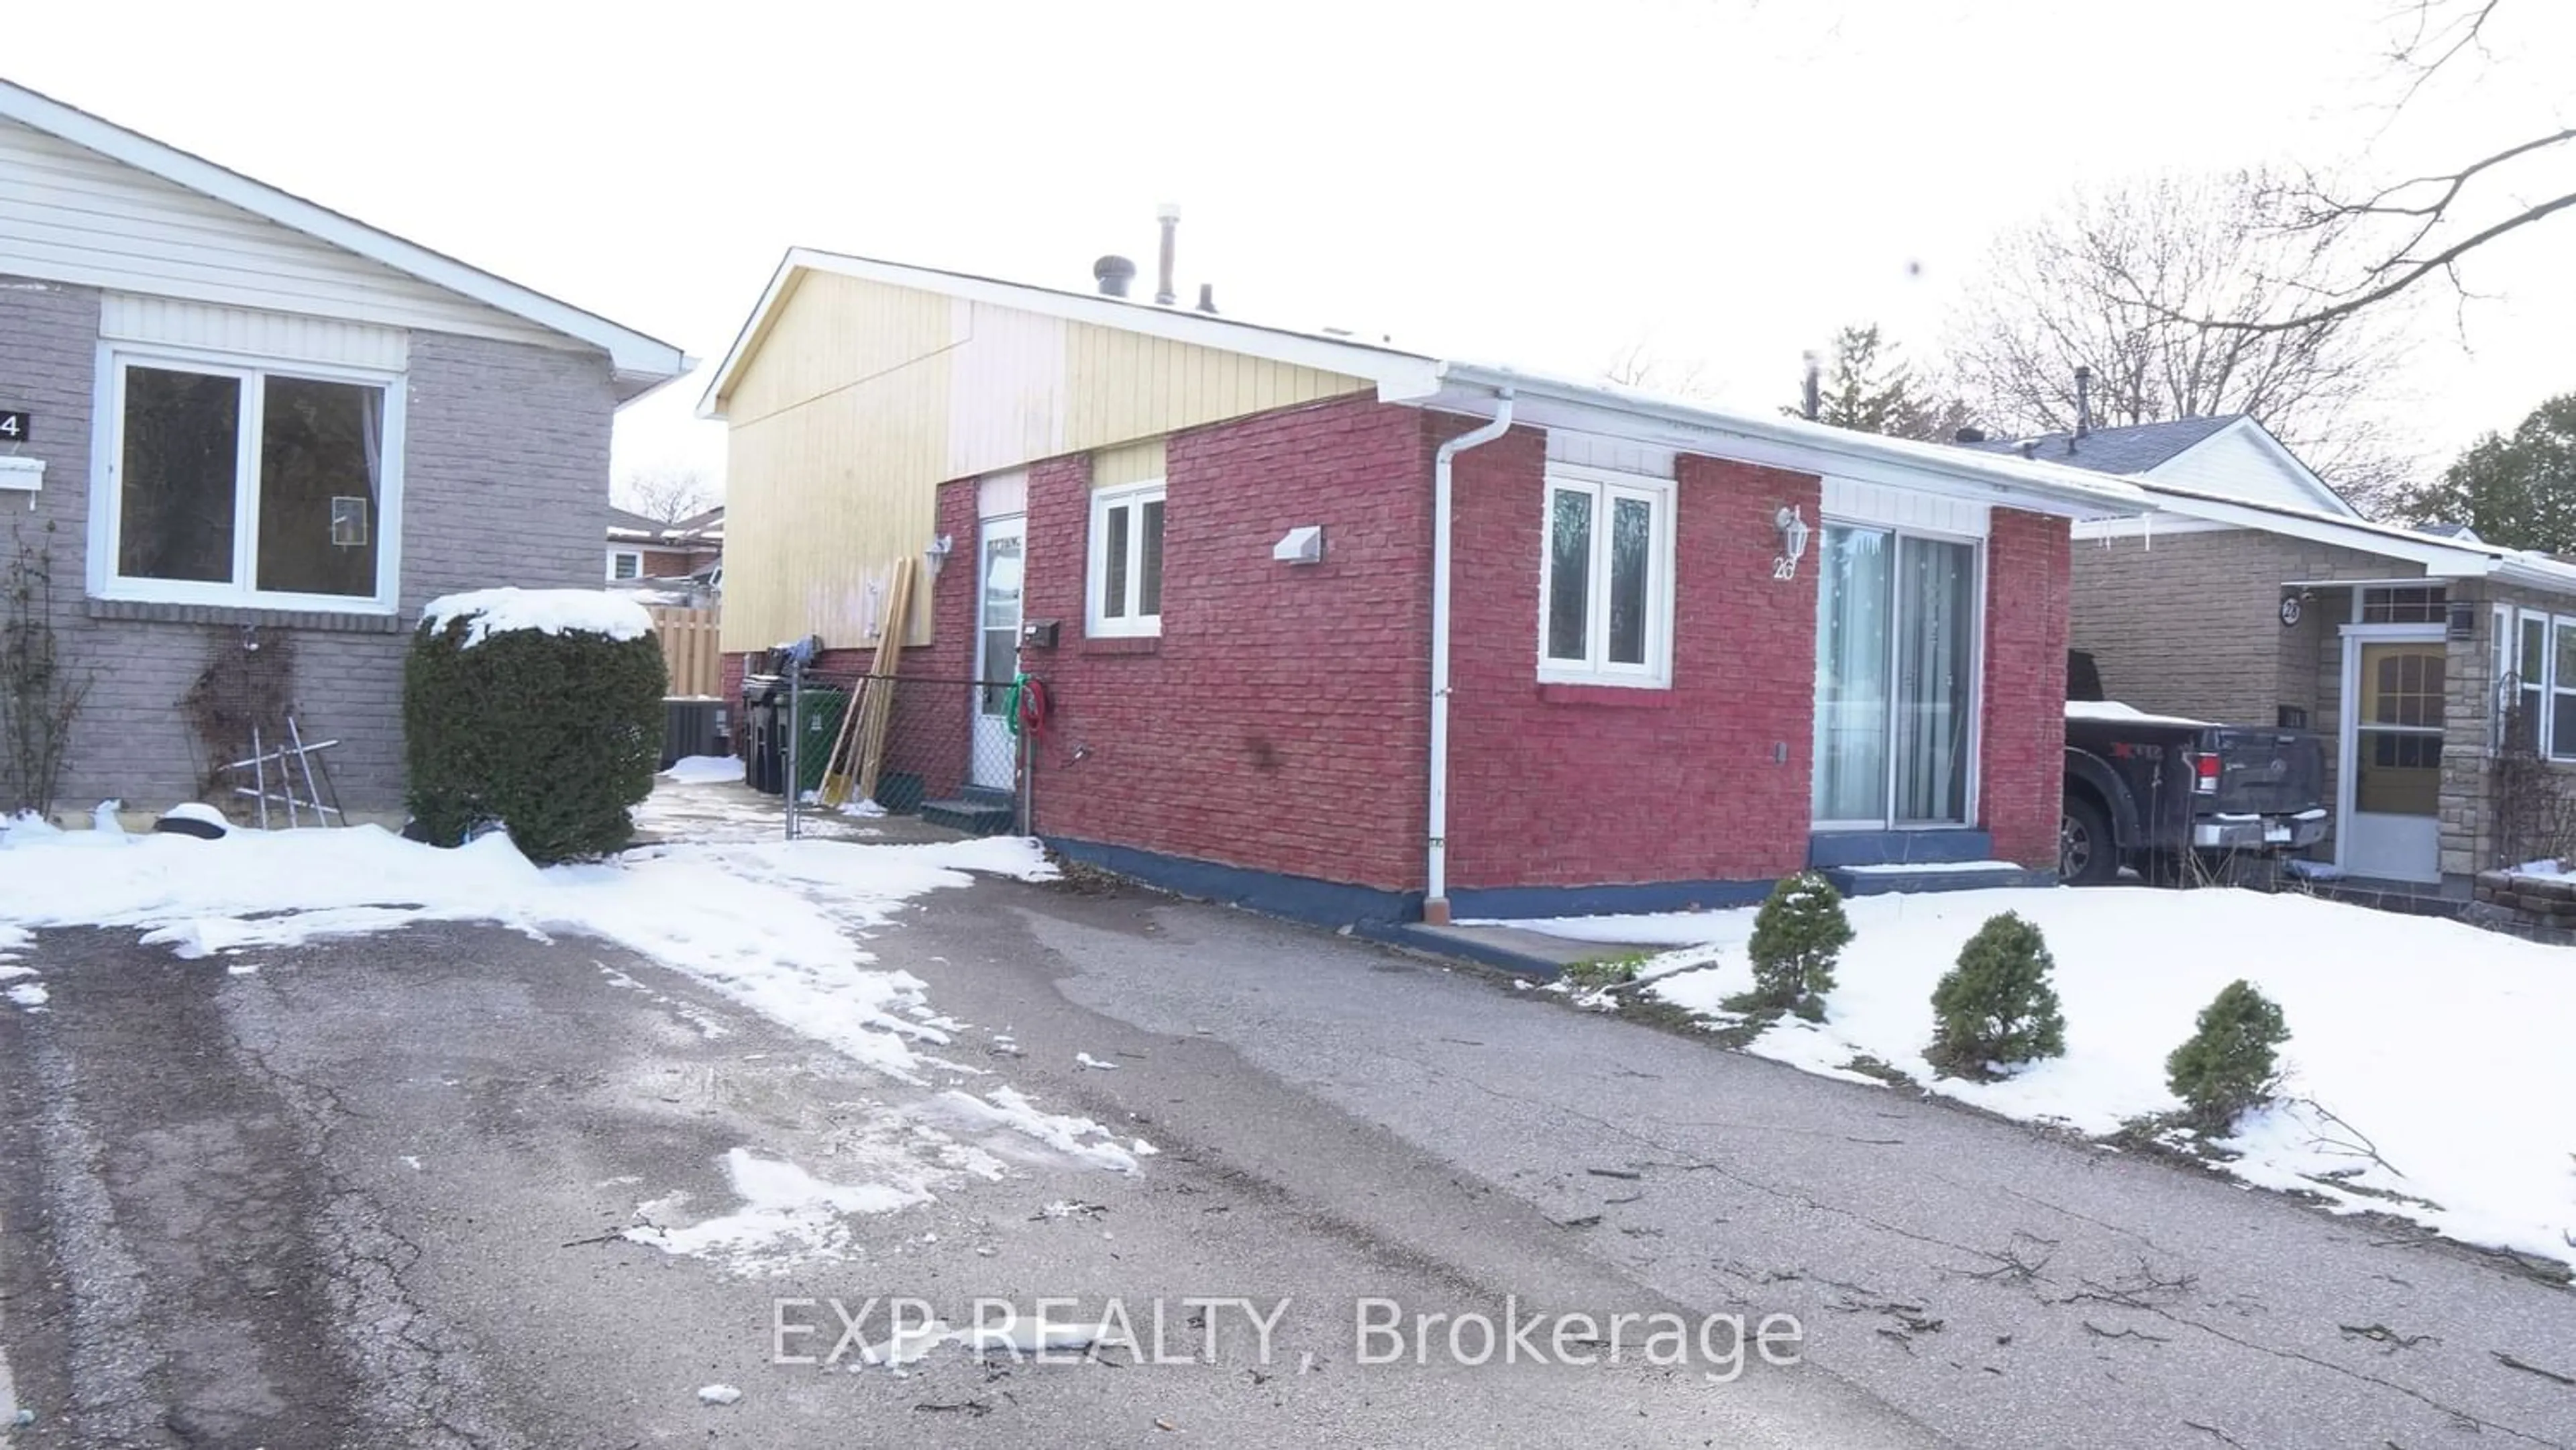 Home with unknown exterior material for 26 Cobbler Cres, Toronto Ontario M3N 2Y7